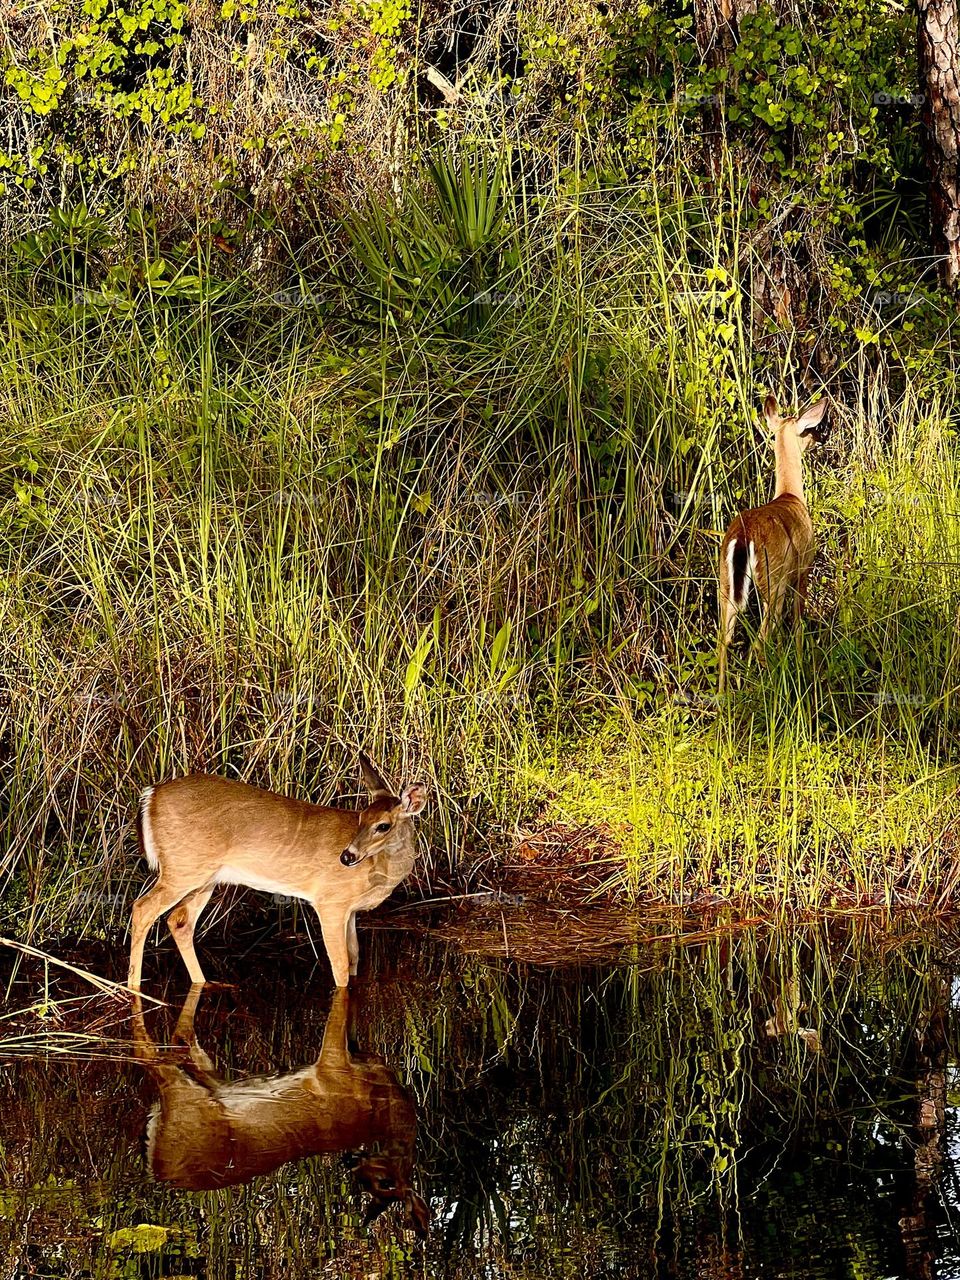 Pair of whitetail deer pausing at the edge of the pond, before disappearing into the forest